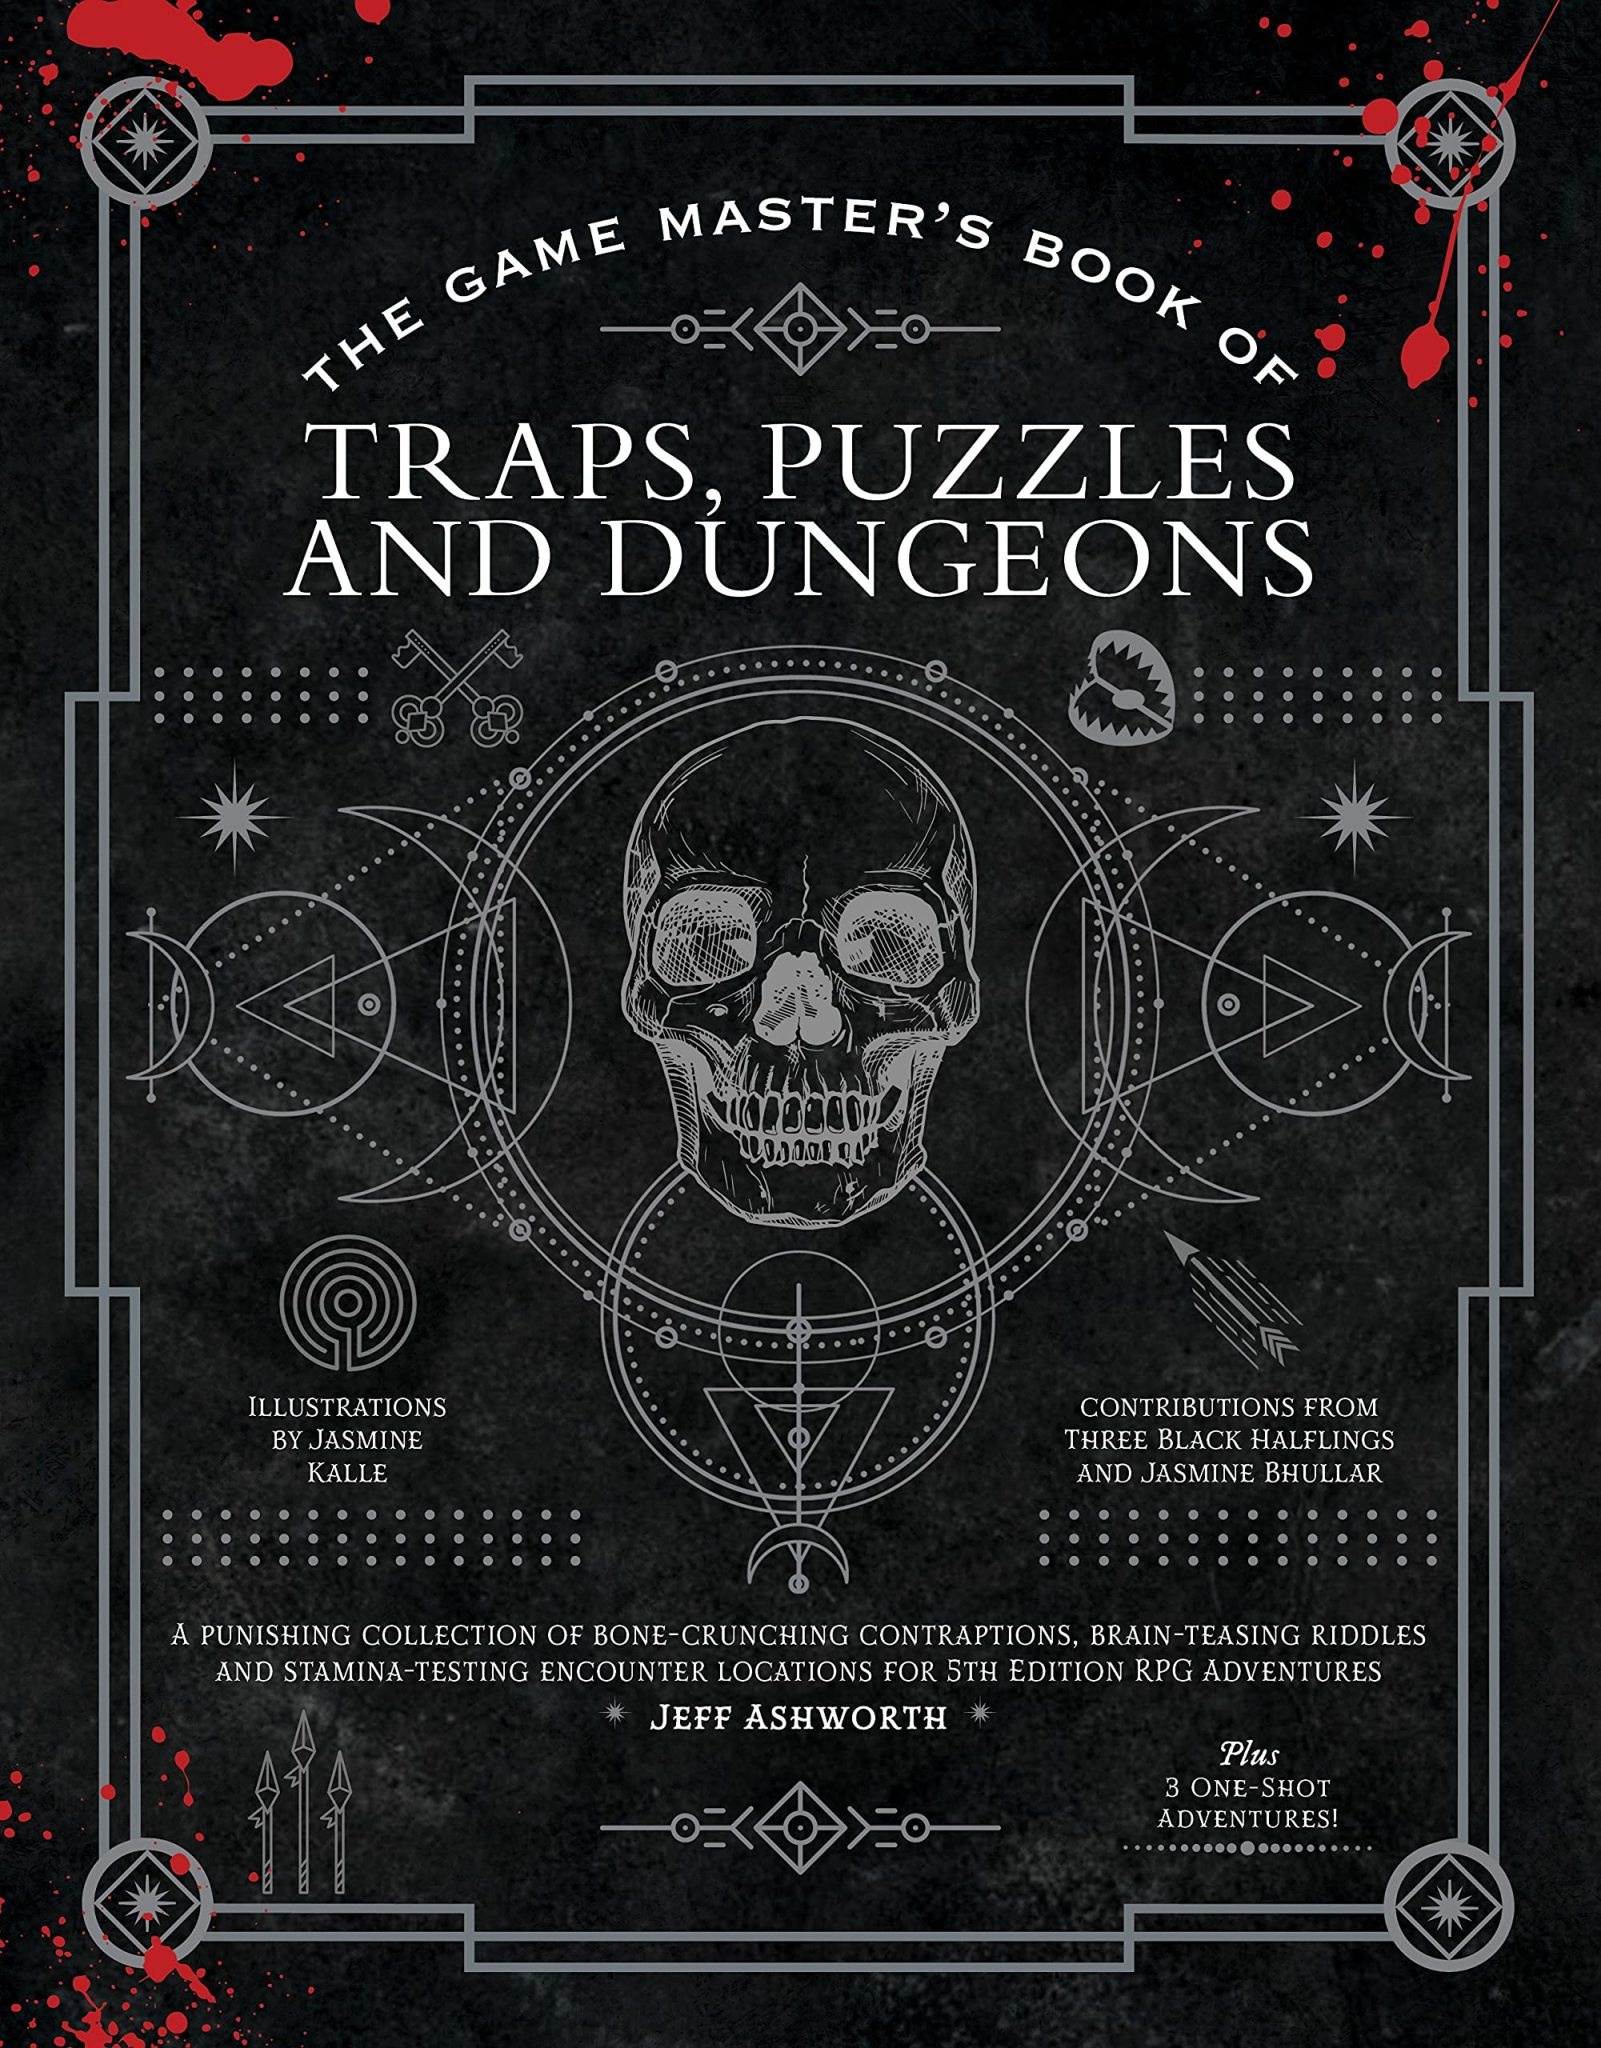 The Game Master's Book of Traps, Puzzles, and Dungeons